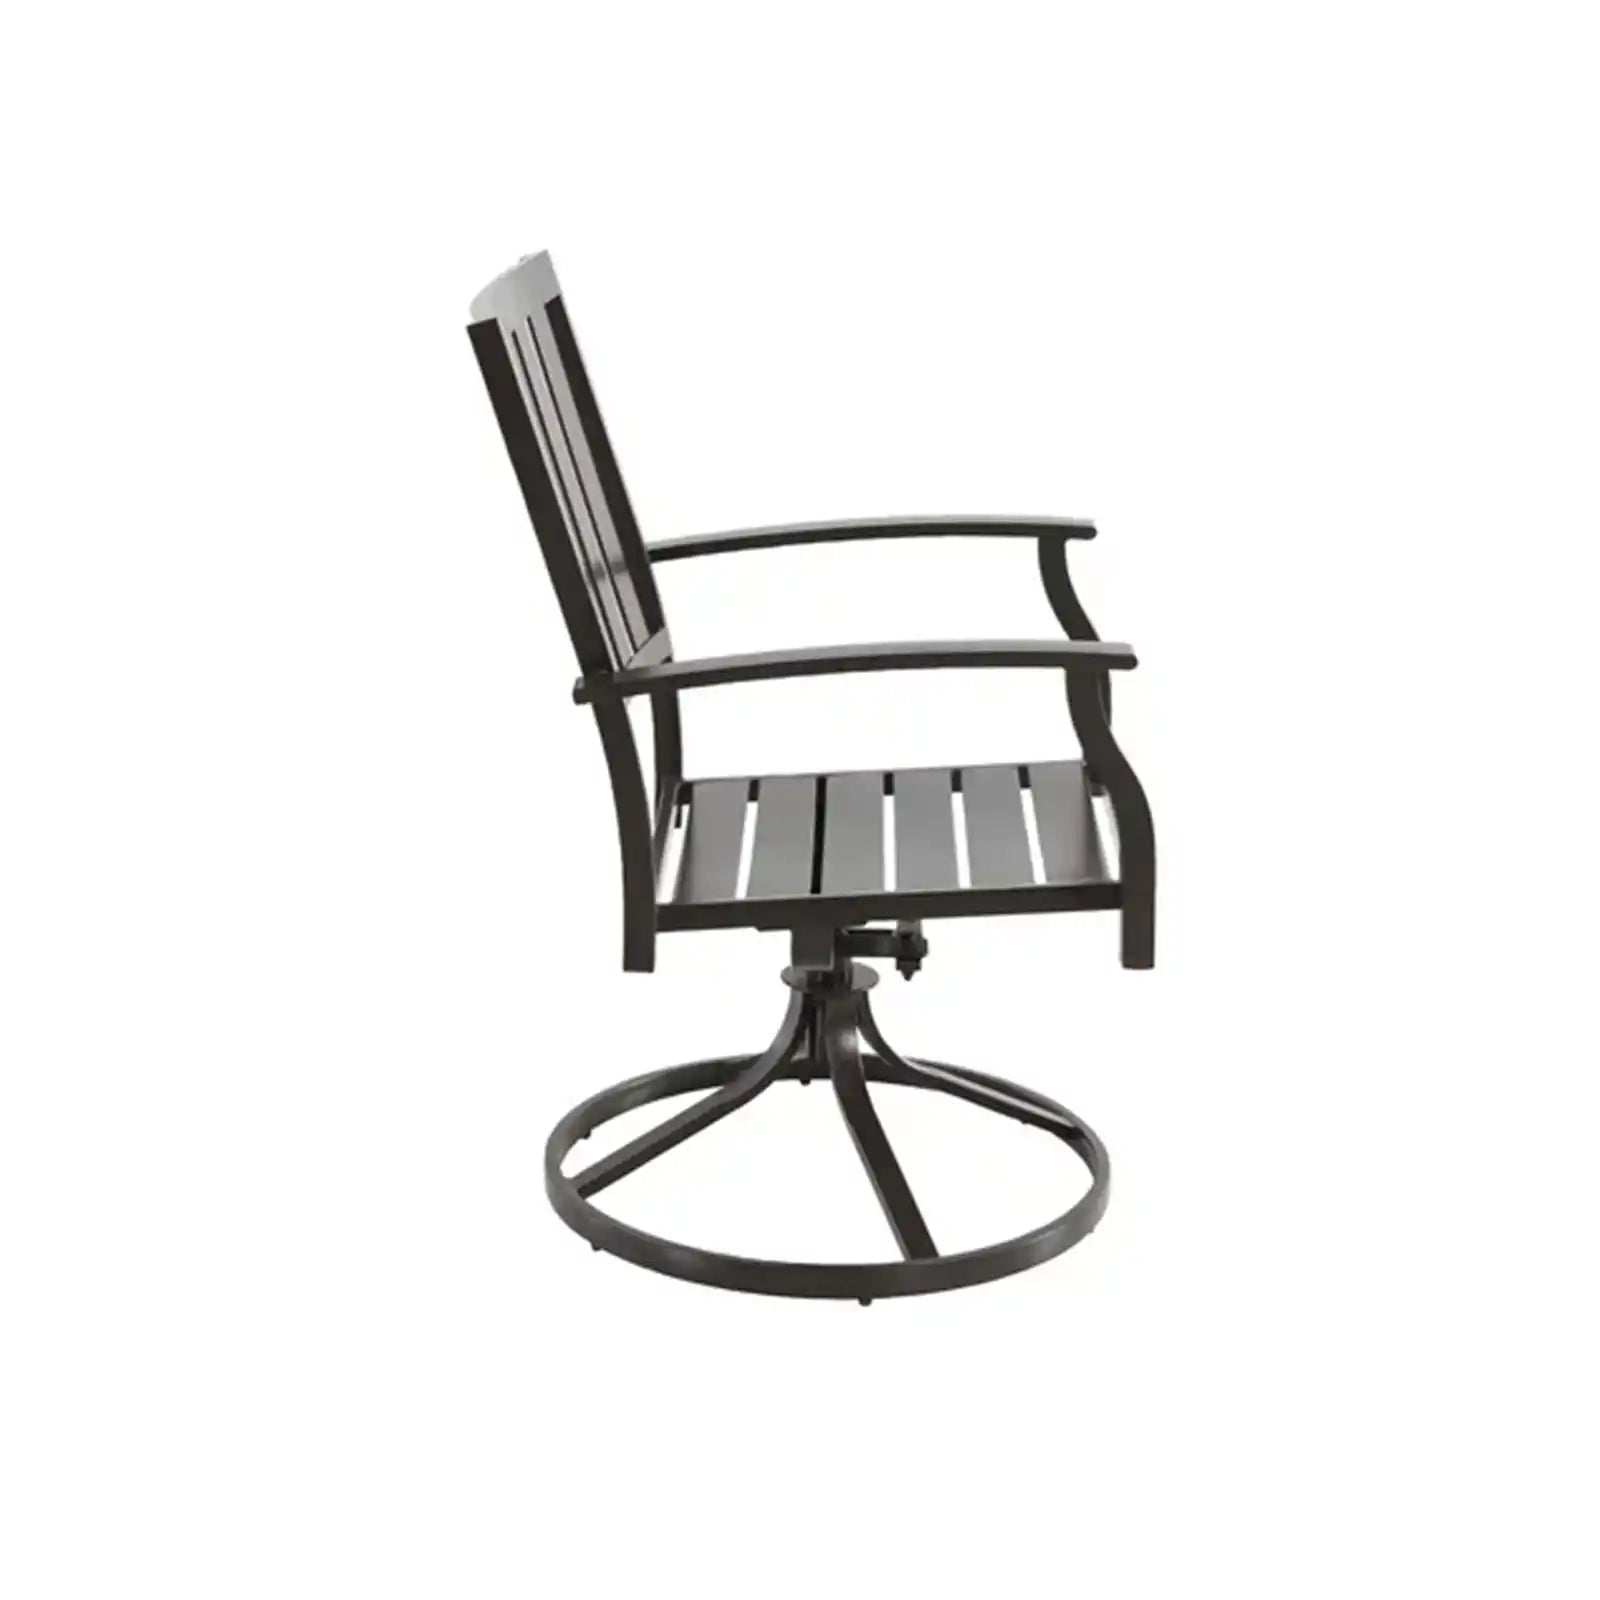 Farmhouse Brown Steel Outdoor Patio Swivel Chairs, Set of 2